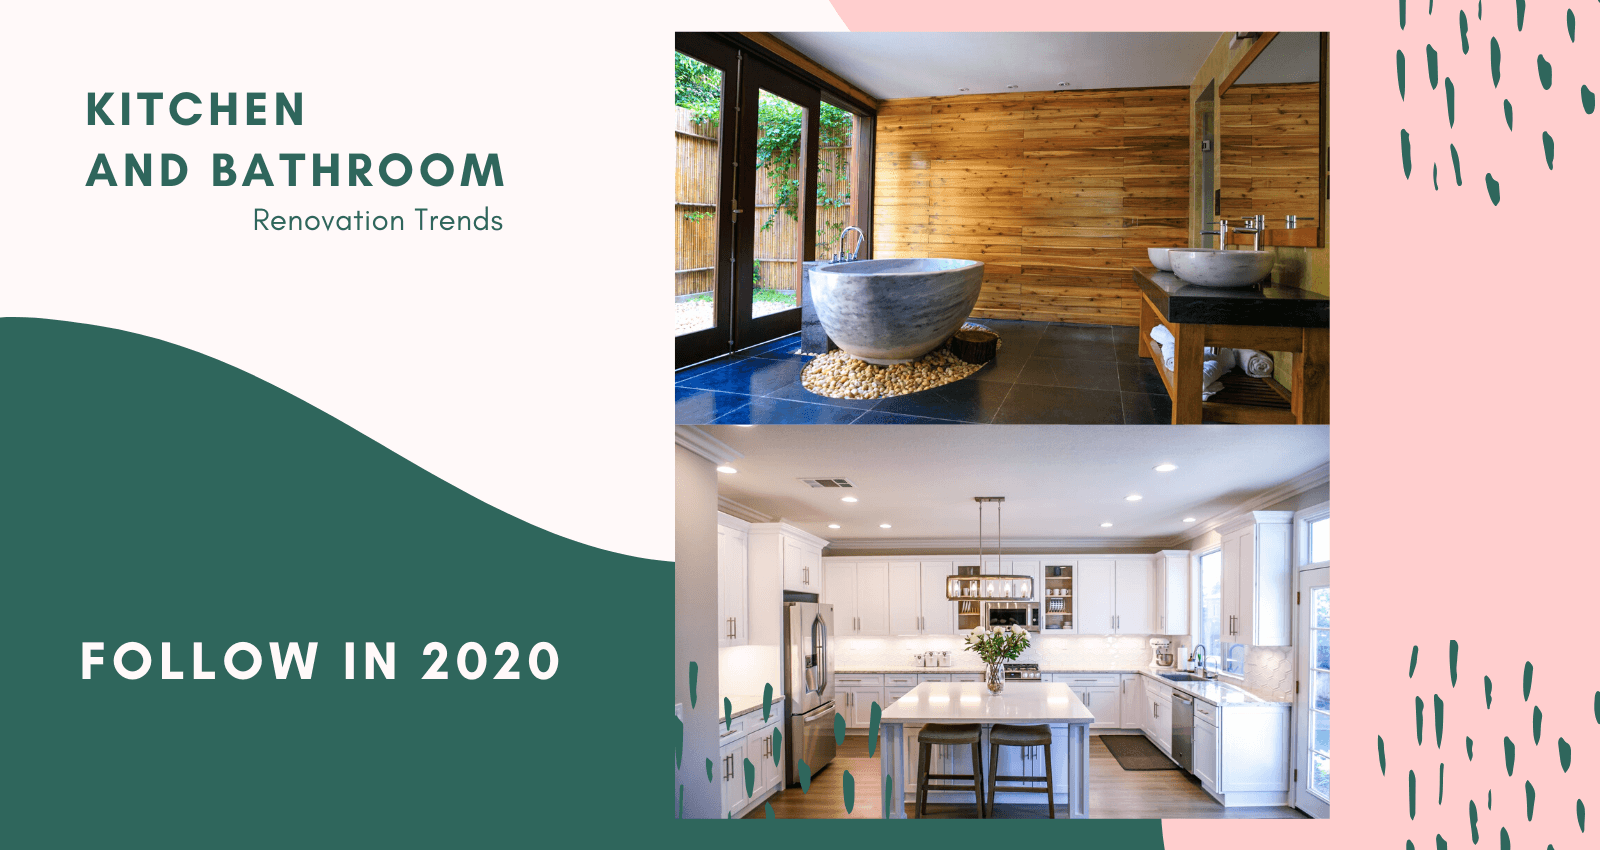 Kitchen and Bathroom Renovation Trends to Follow in 2020